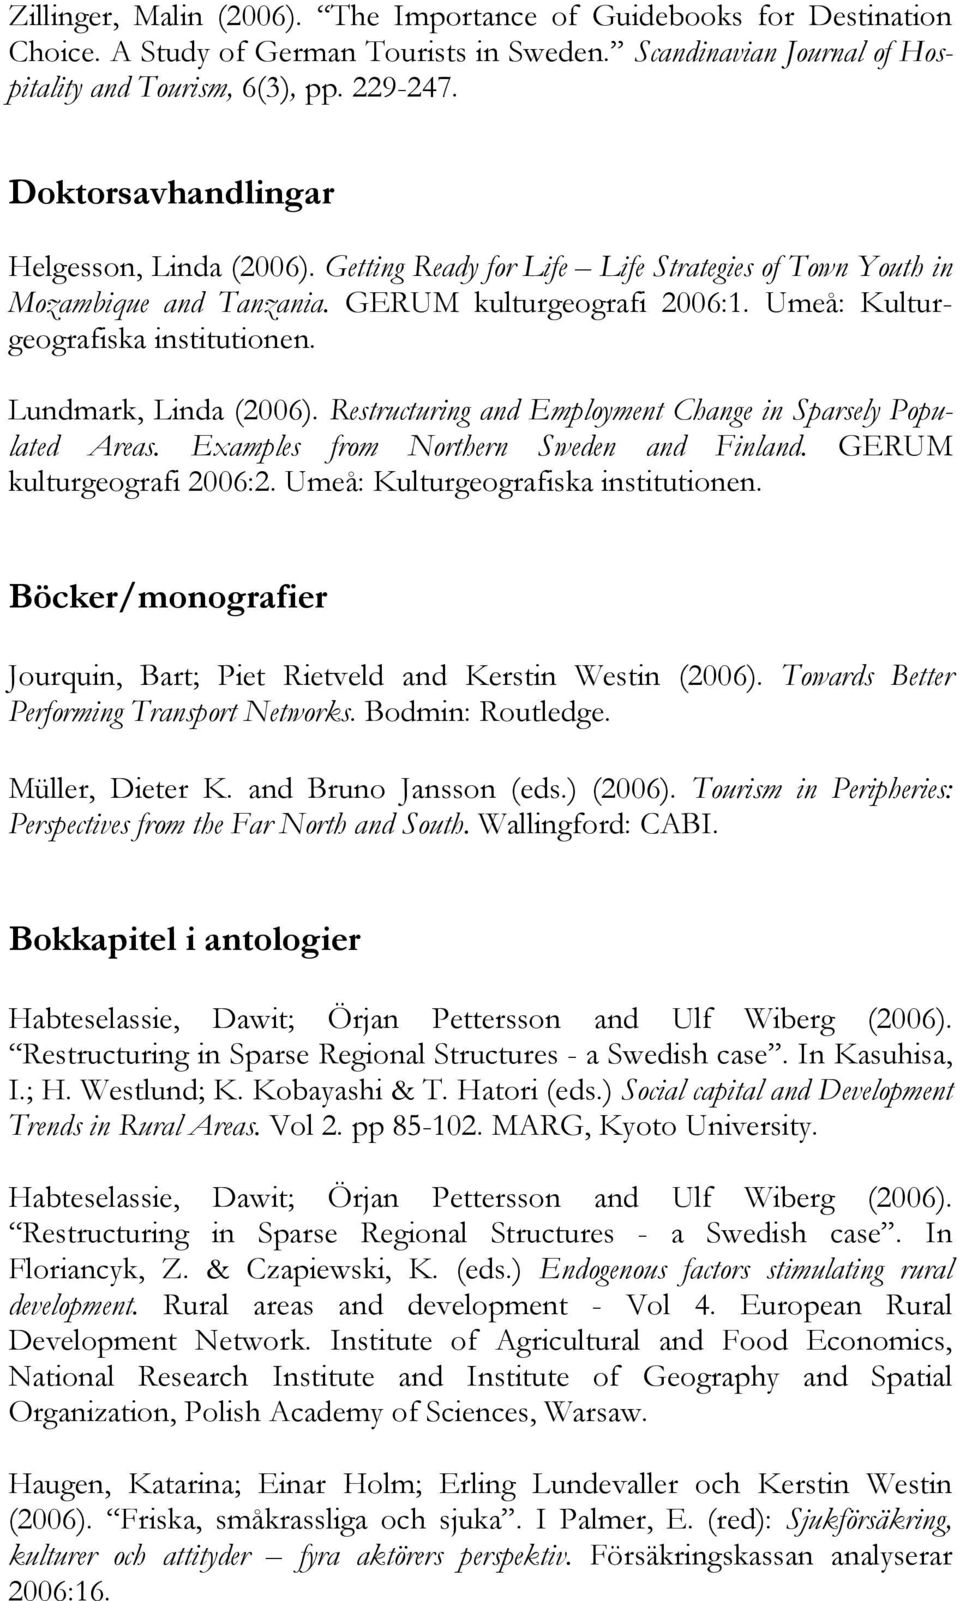 Umeå: Kulturgeografiska Lundmark, Linda (2006). Restructuring and Employment Change in Sparsely Populated Areas. Examples from Northern Sweden and Finland. GERUM kulturgeografi 2006:2.